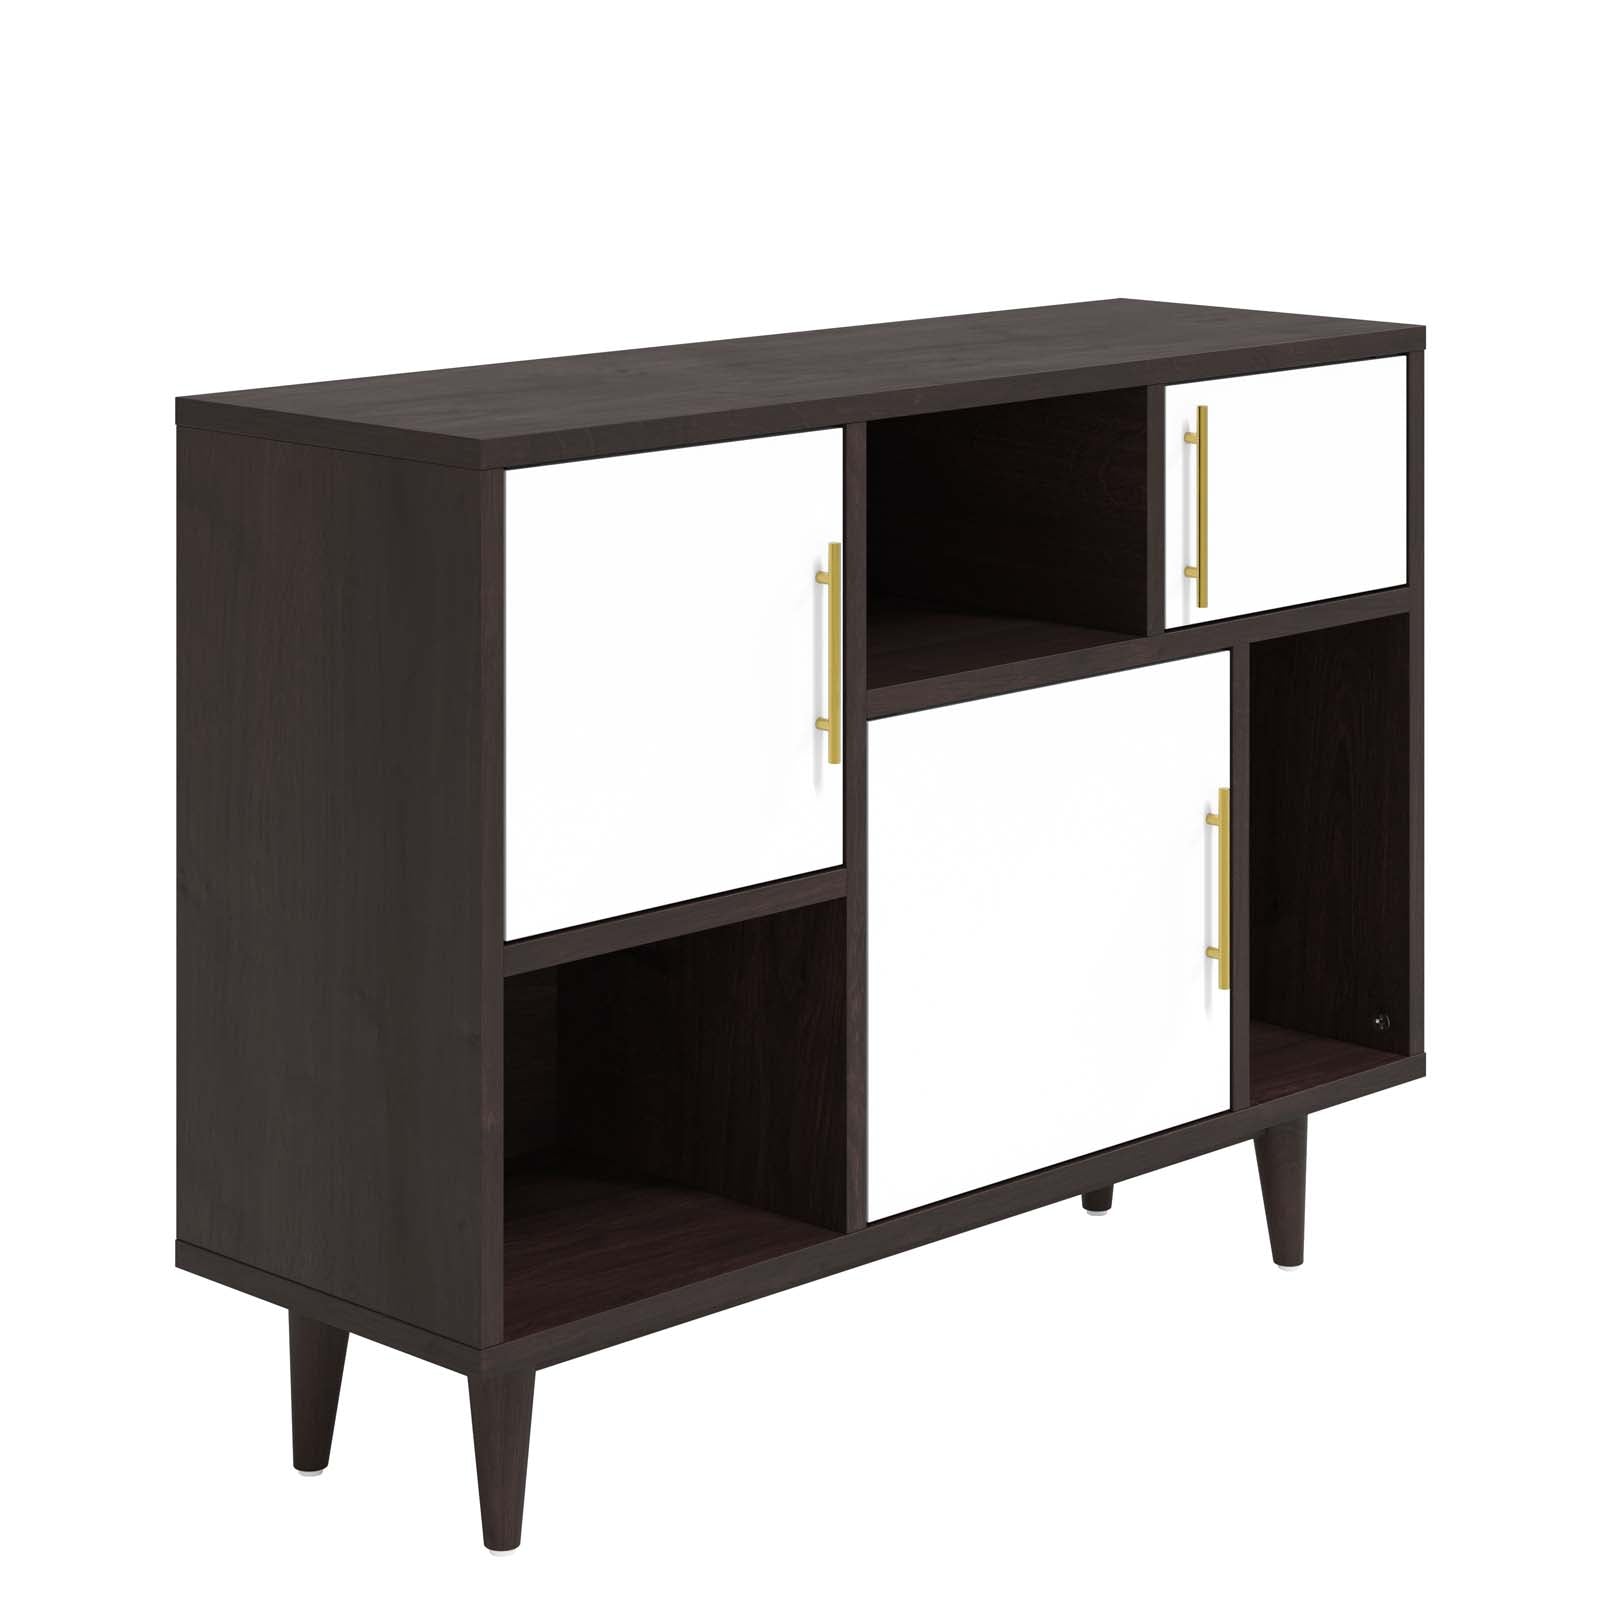 Modway Bookcases & Display Units - Daxton Display Stand Cappuccino White